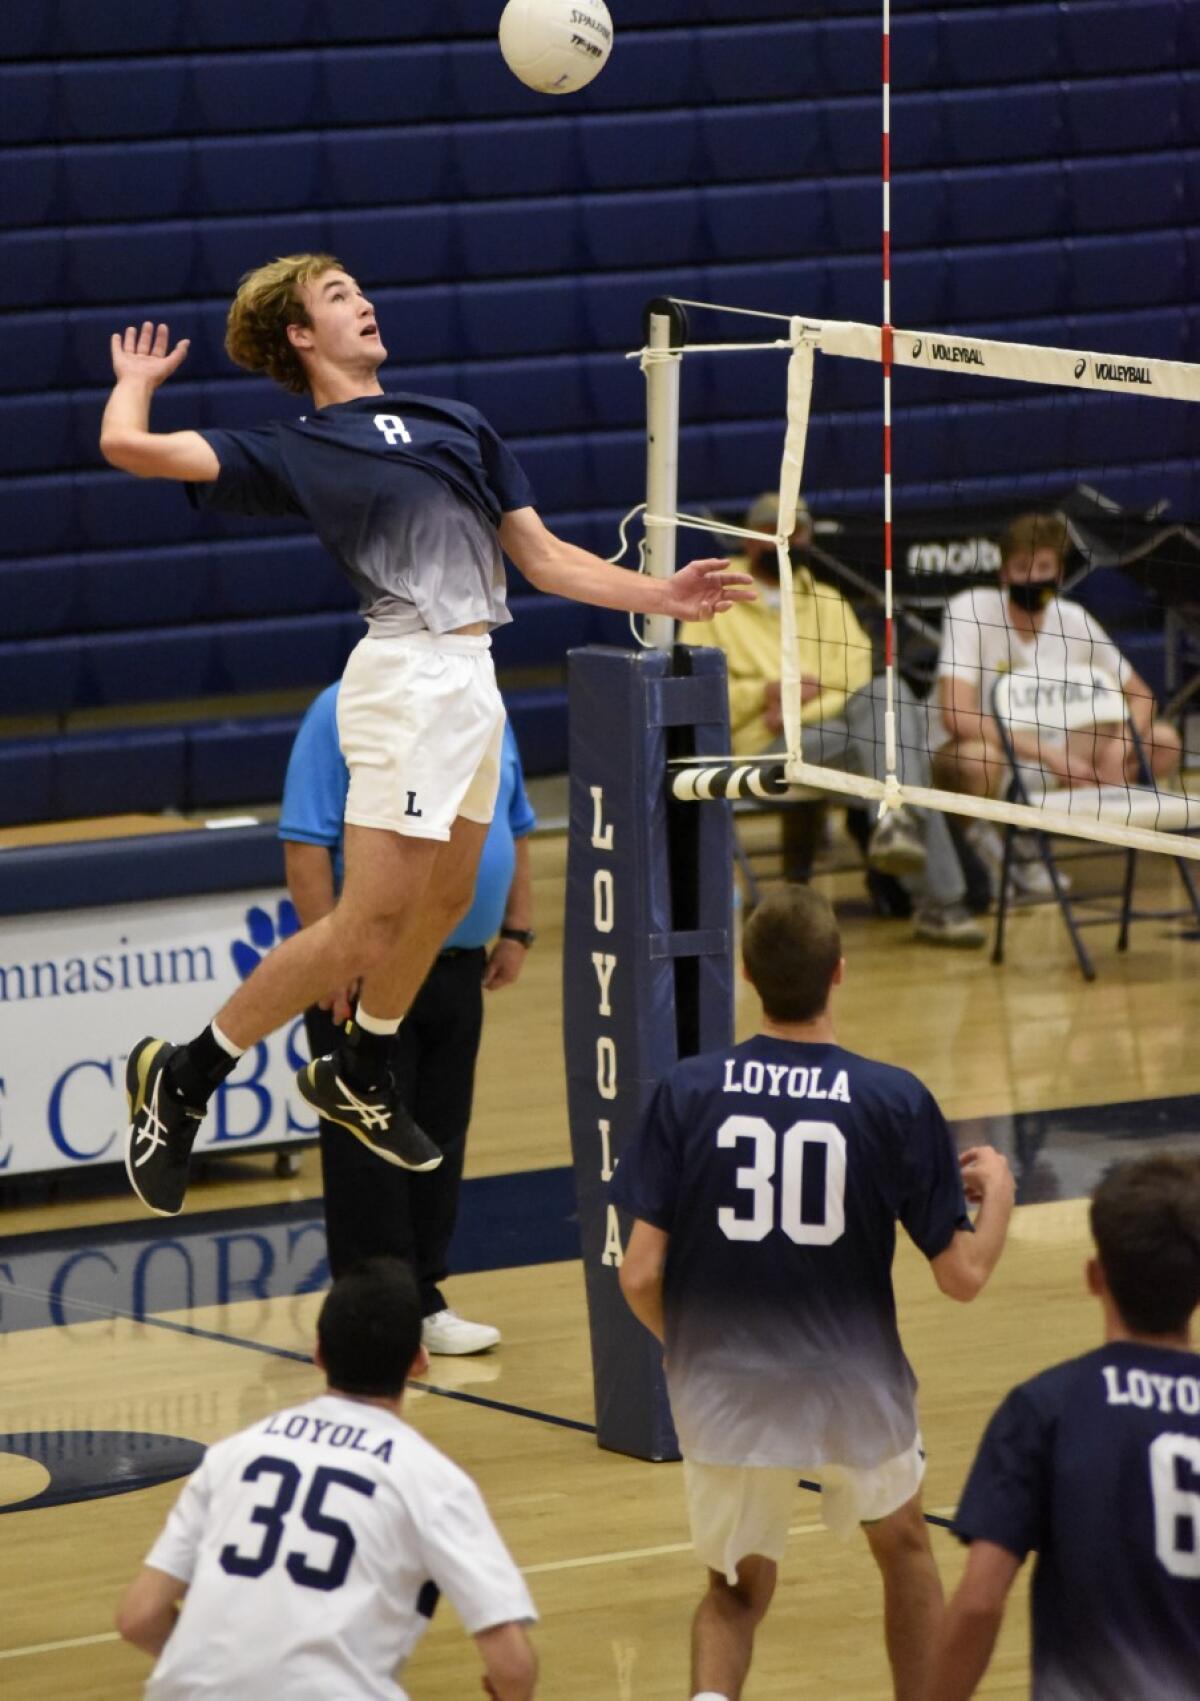 Dillon Klein of Loyola leaps for a kill against Mira Costa on Saturday.